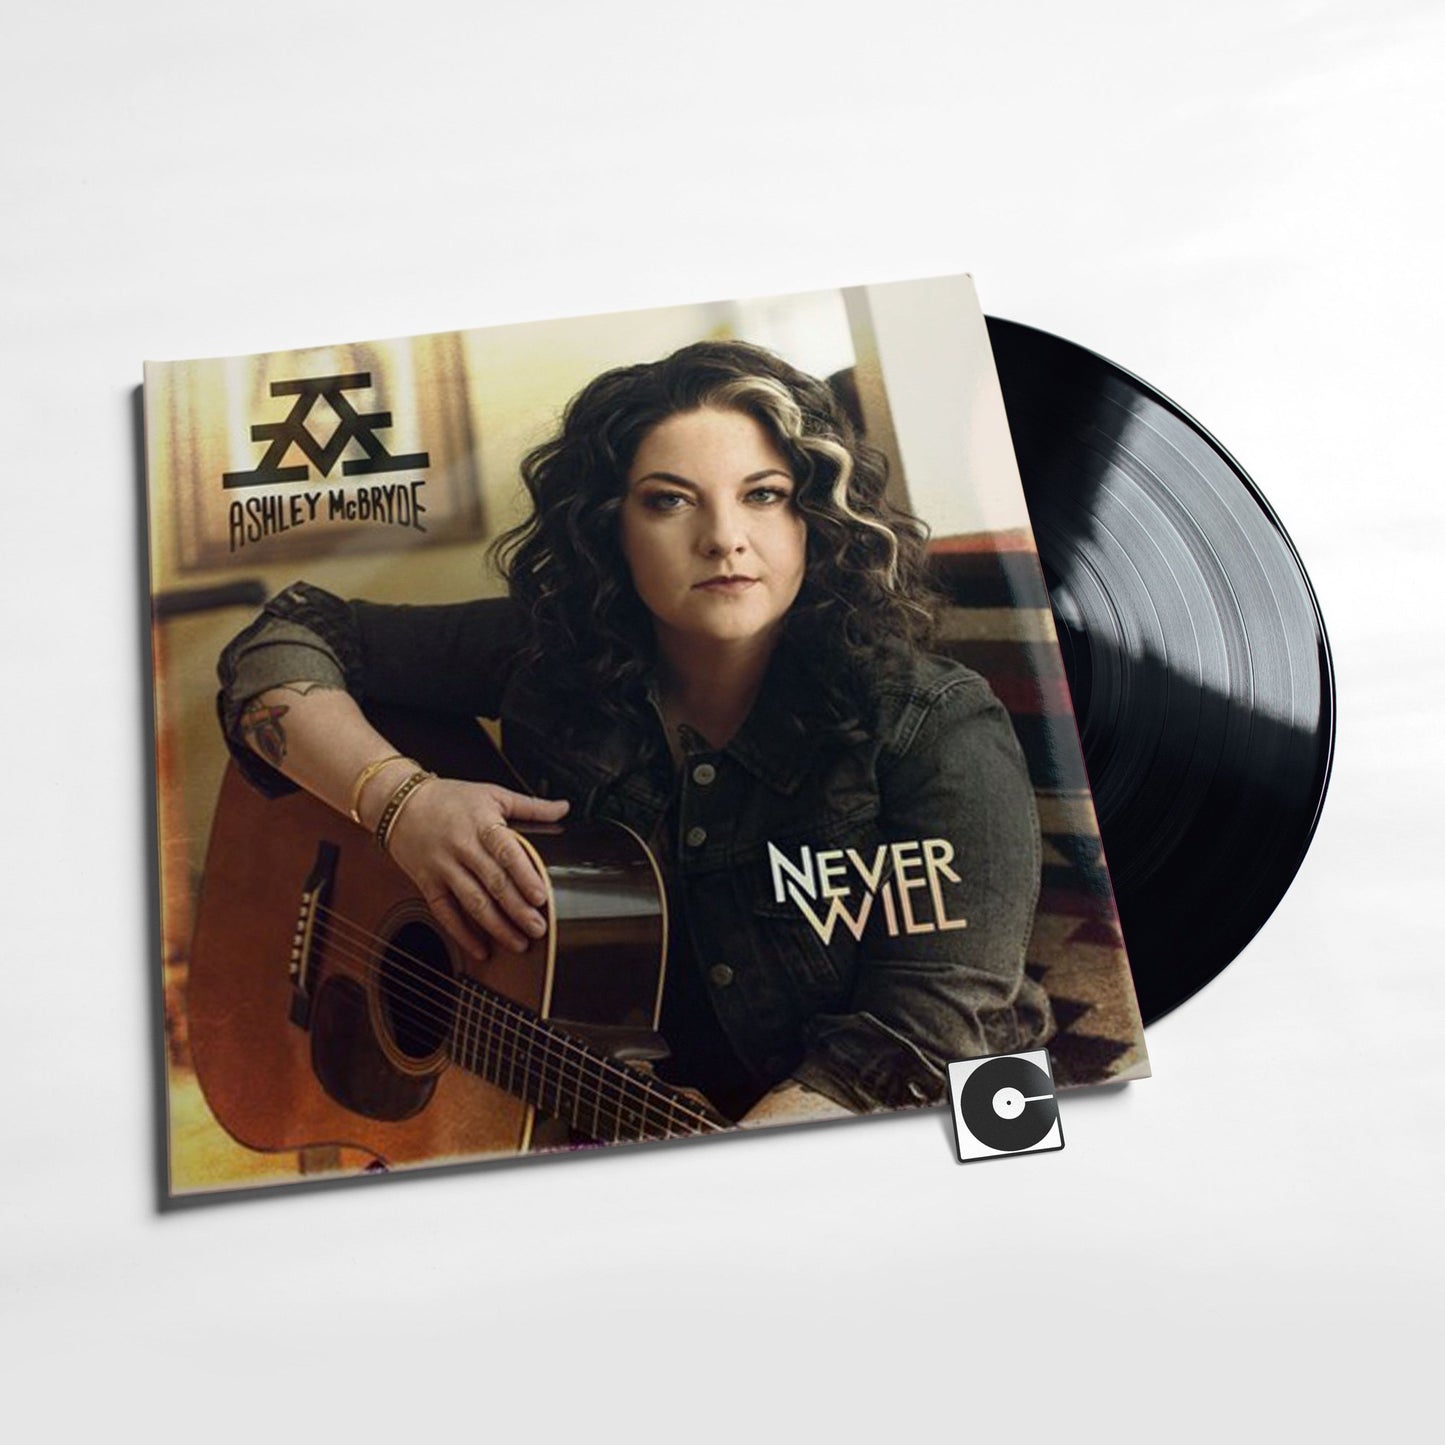 Ashley McBryde - "Never Will"